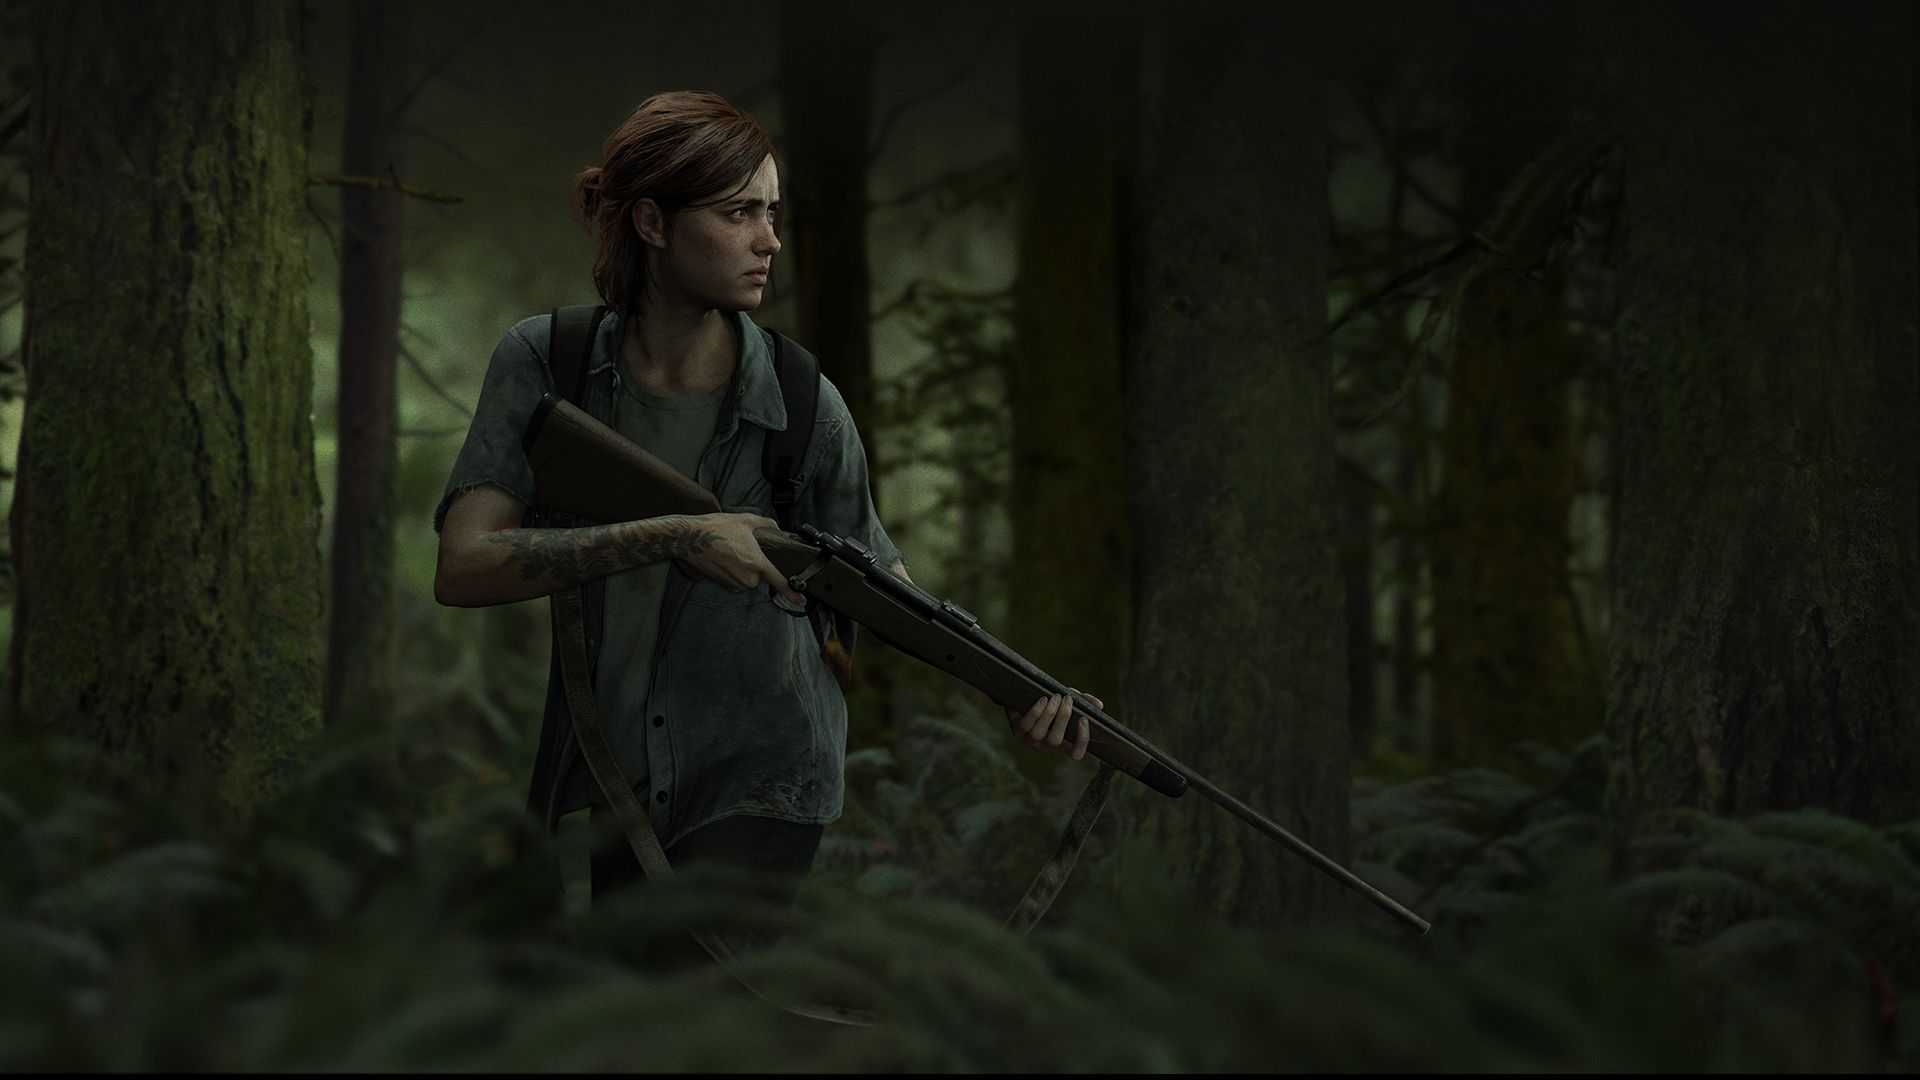 Free download The Last of Us Part 2 Ellie Wallpaper